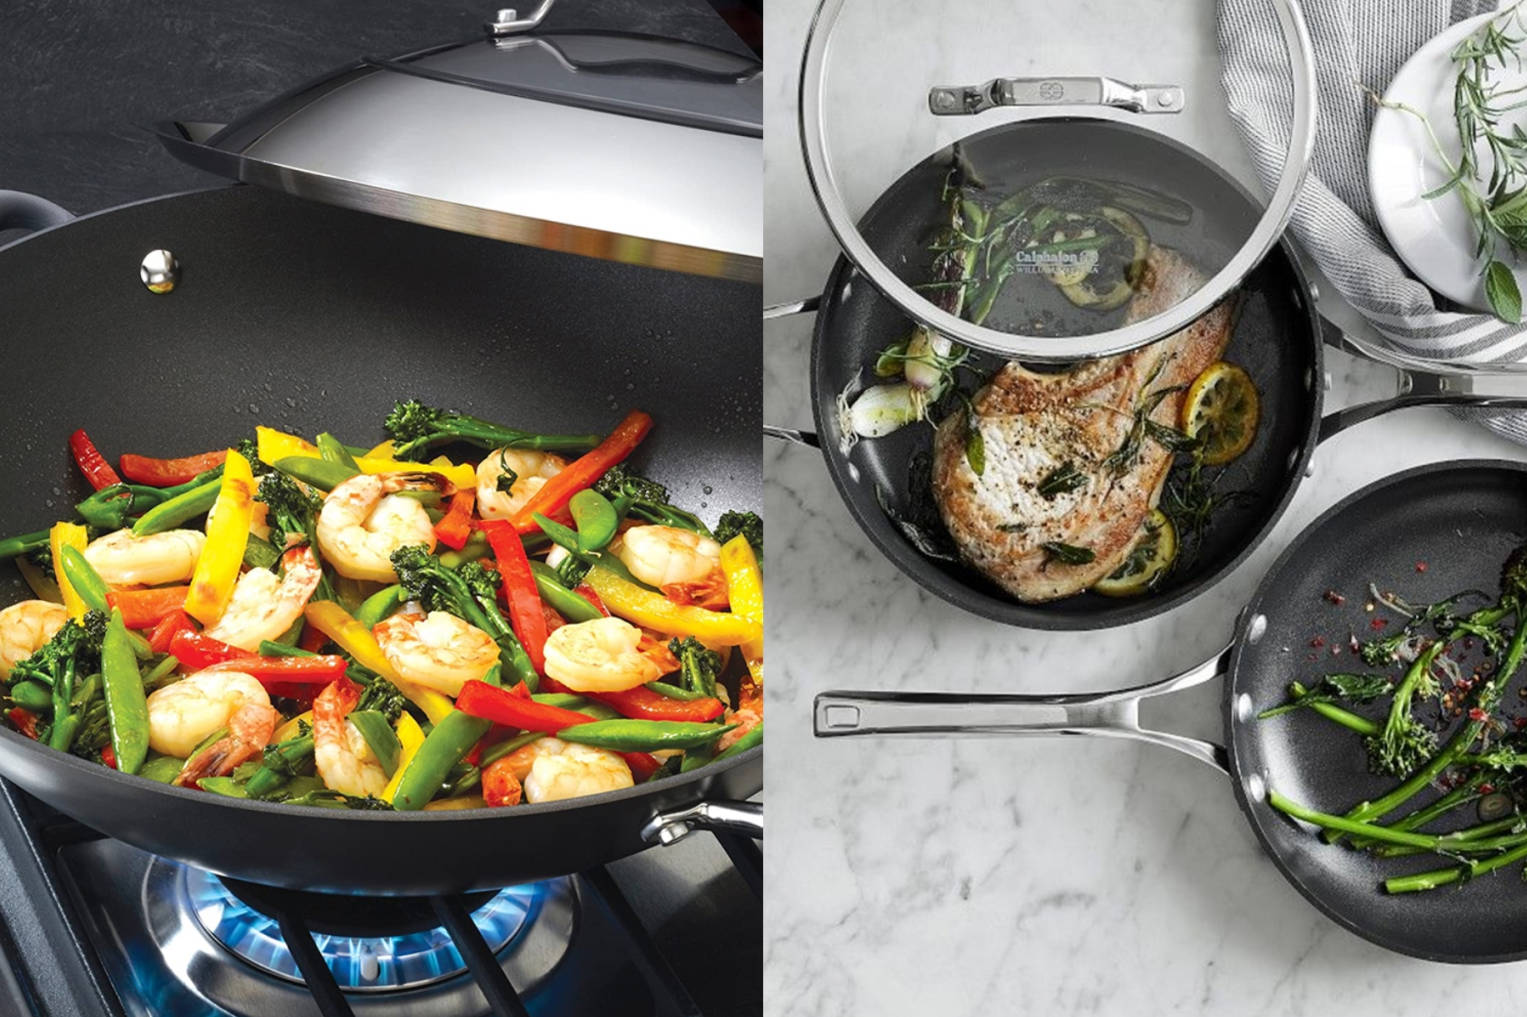 Anolon vs. Calphalon Who Wins in the Nonstick Cookware Wars